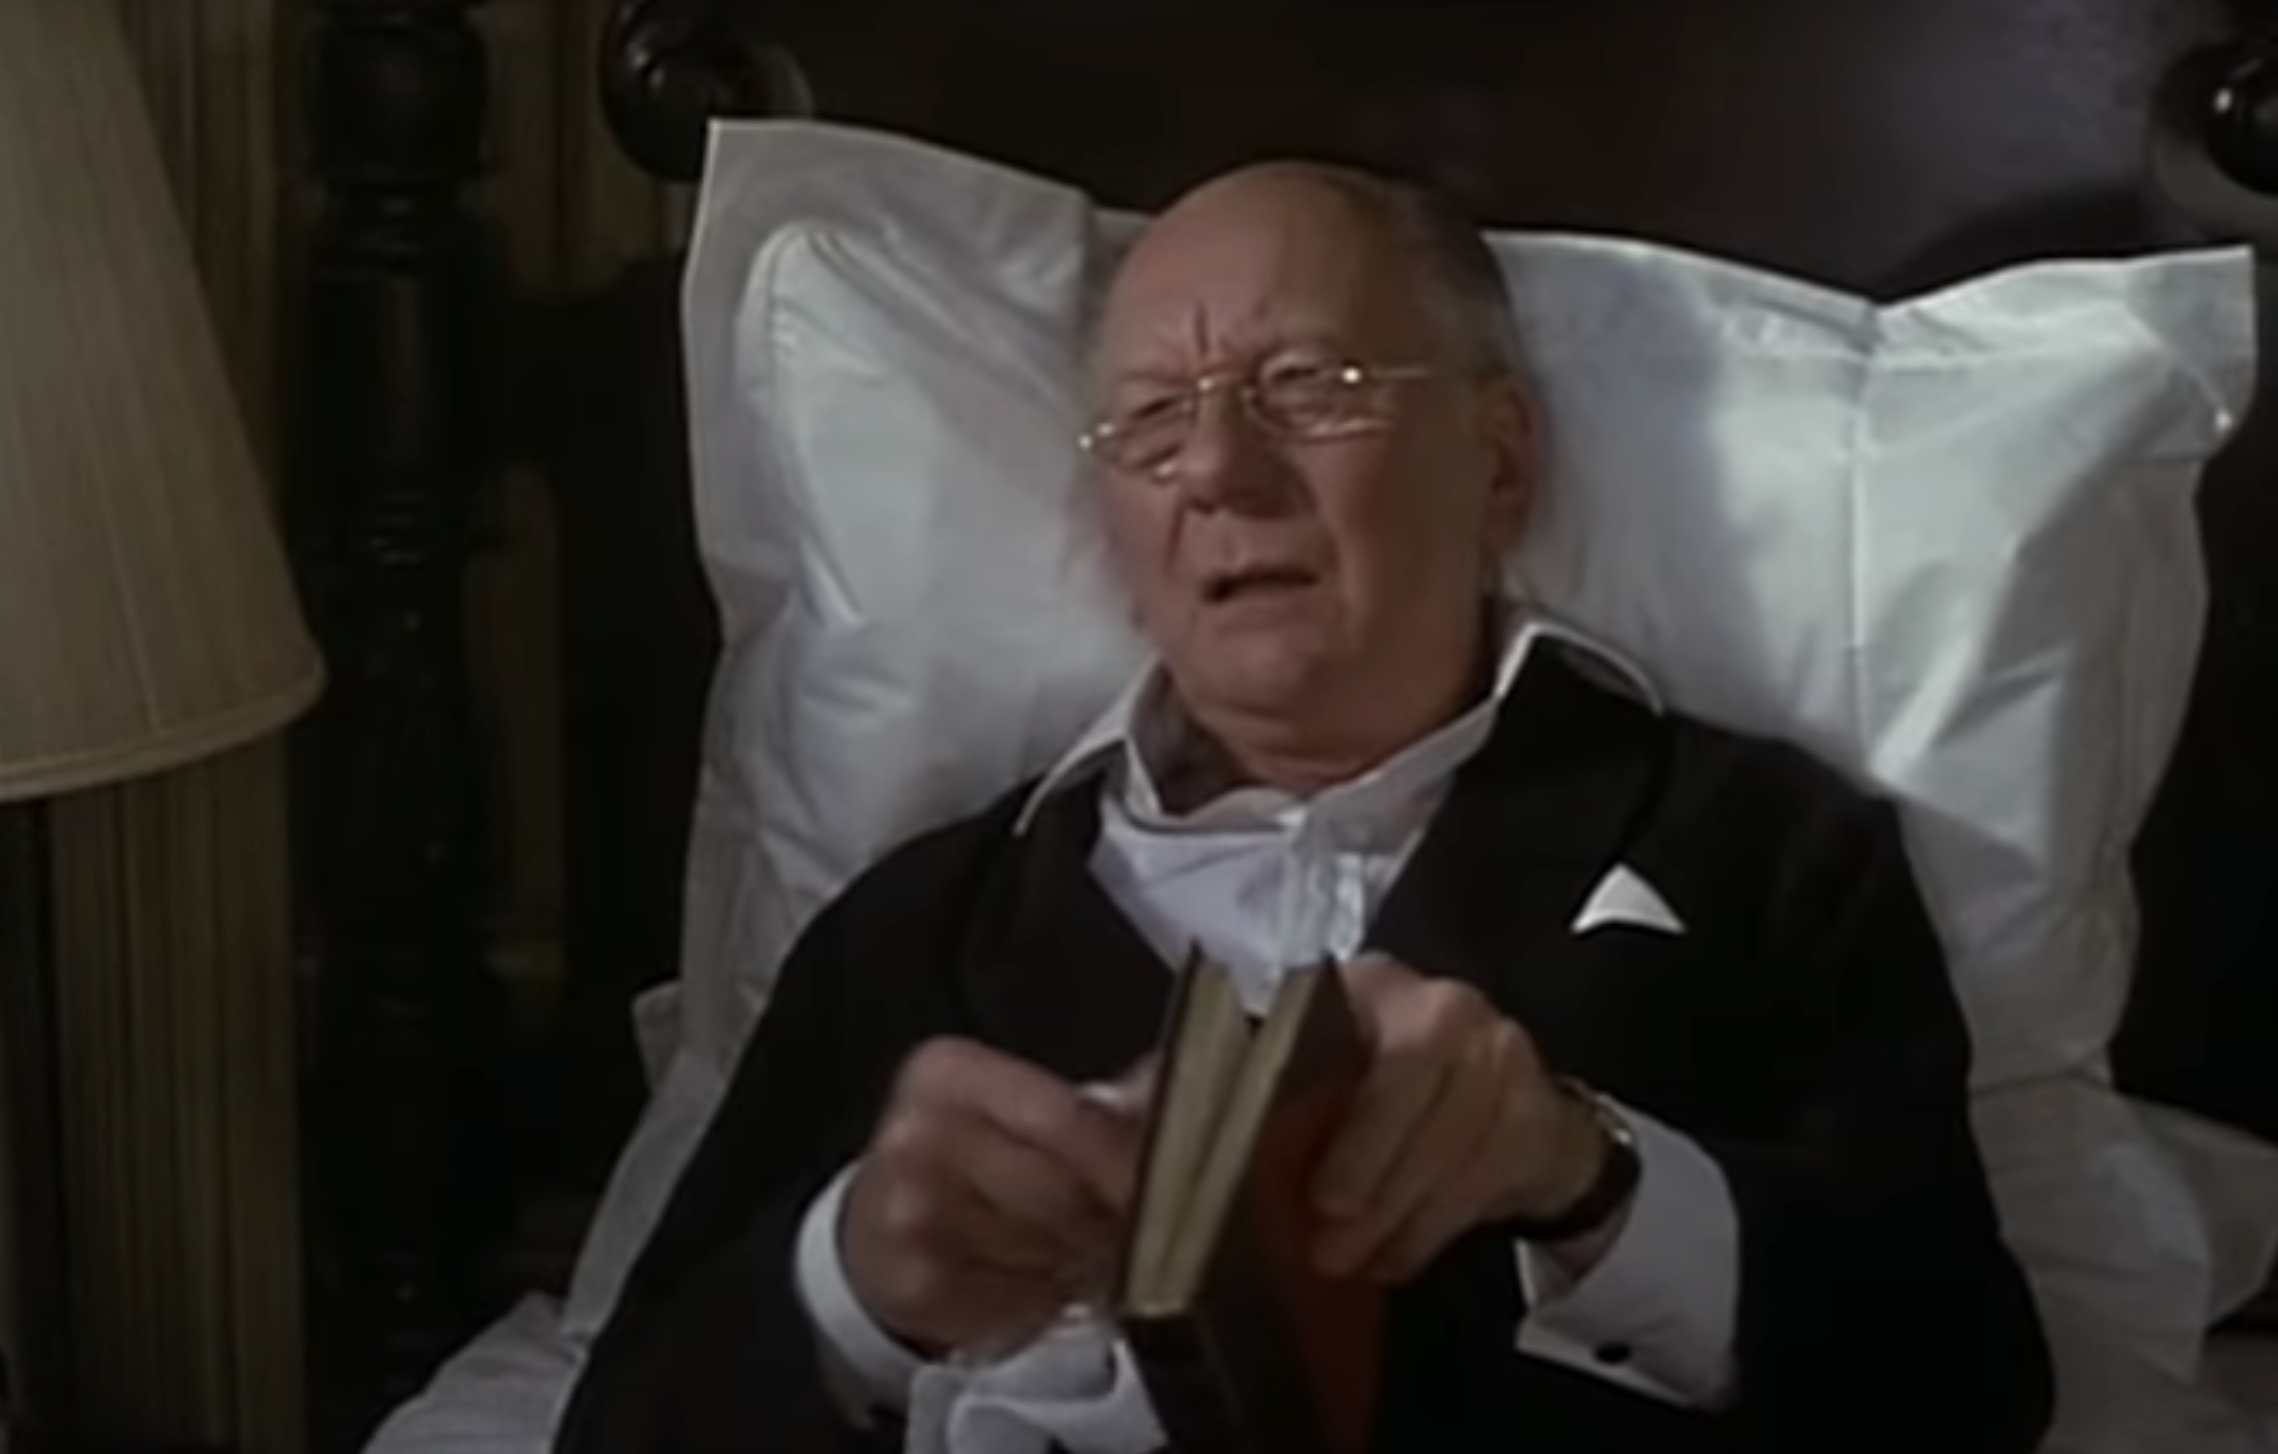 Elderly man in bed holding a book, looking pensive, from a film scene